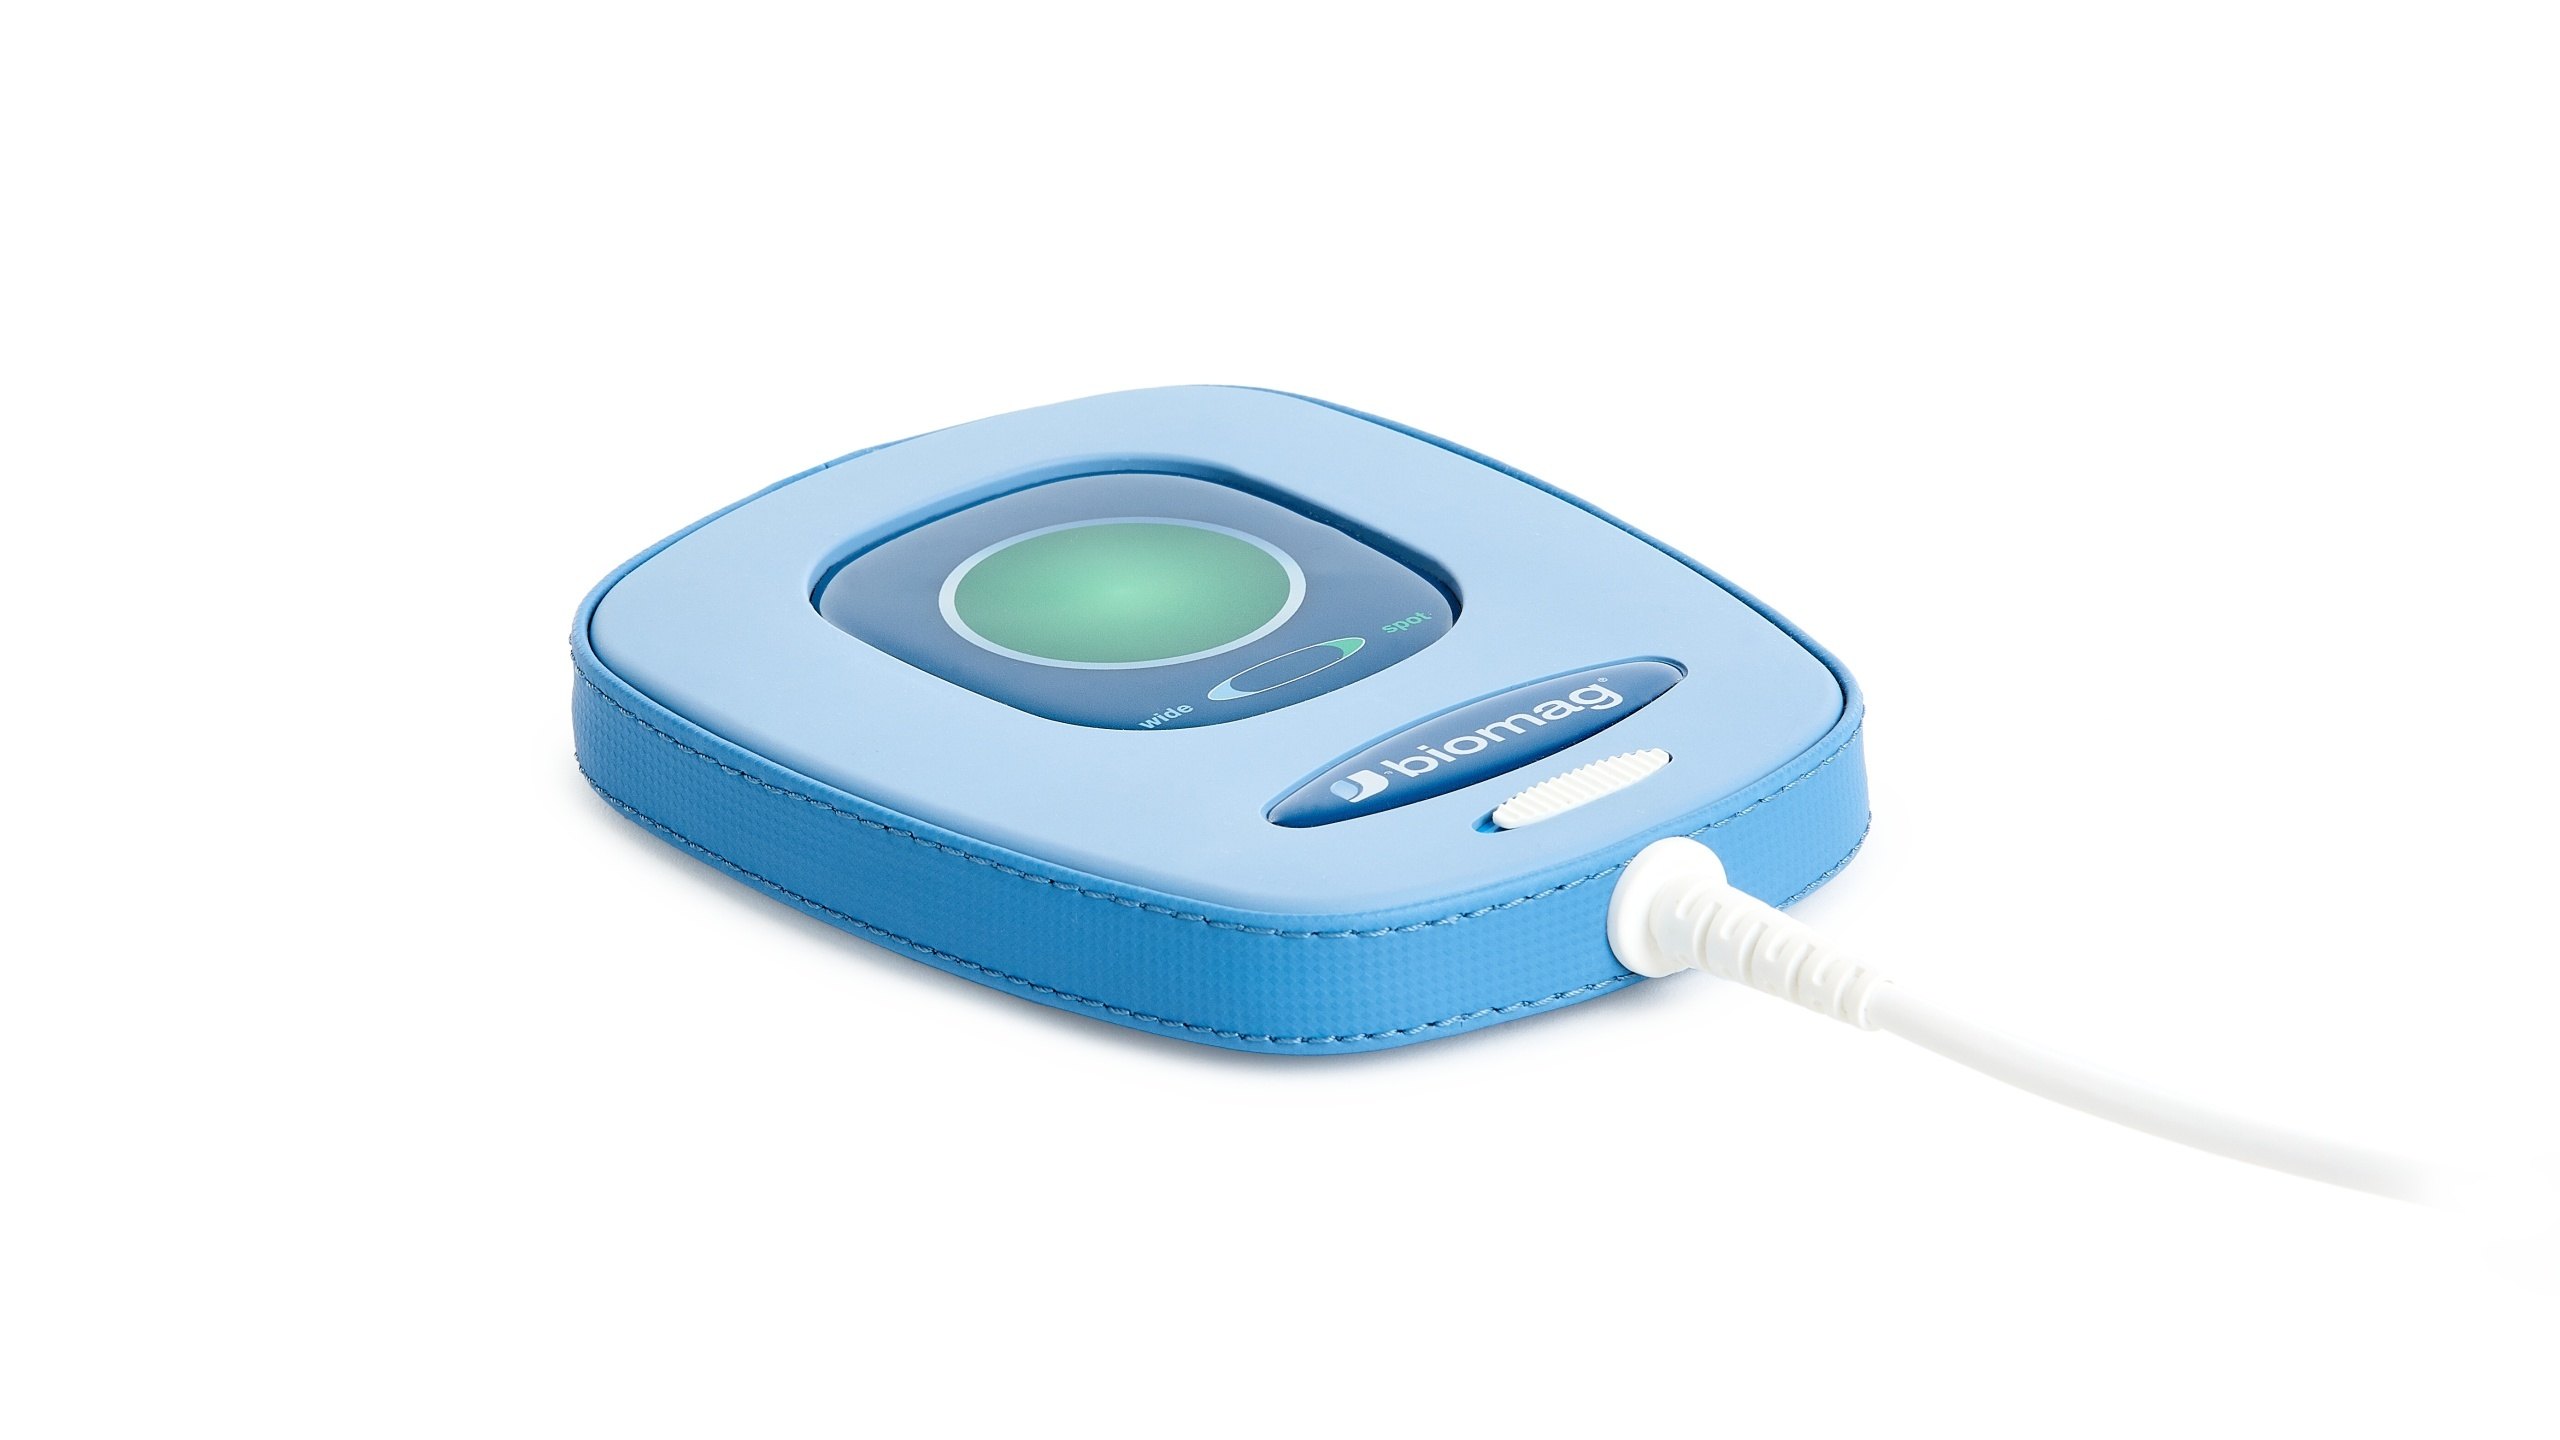 Magnetic therapy applicator A62P2 with a switch option. Switching can increase healing effects. Ideal for small joints, face, wrist, fingers issues.